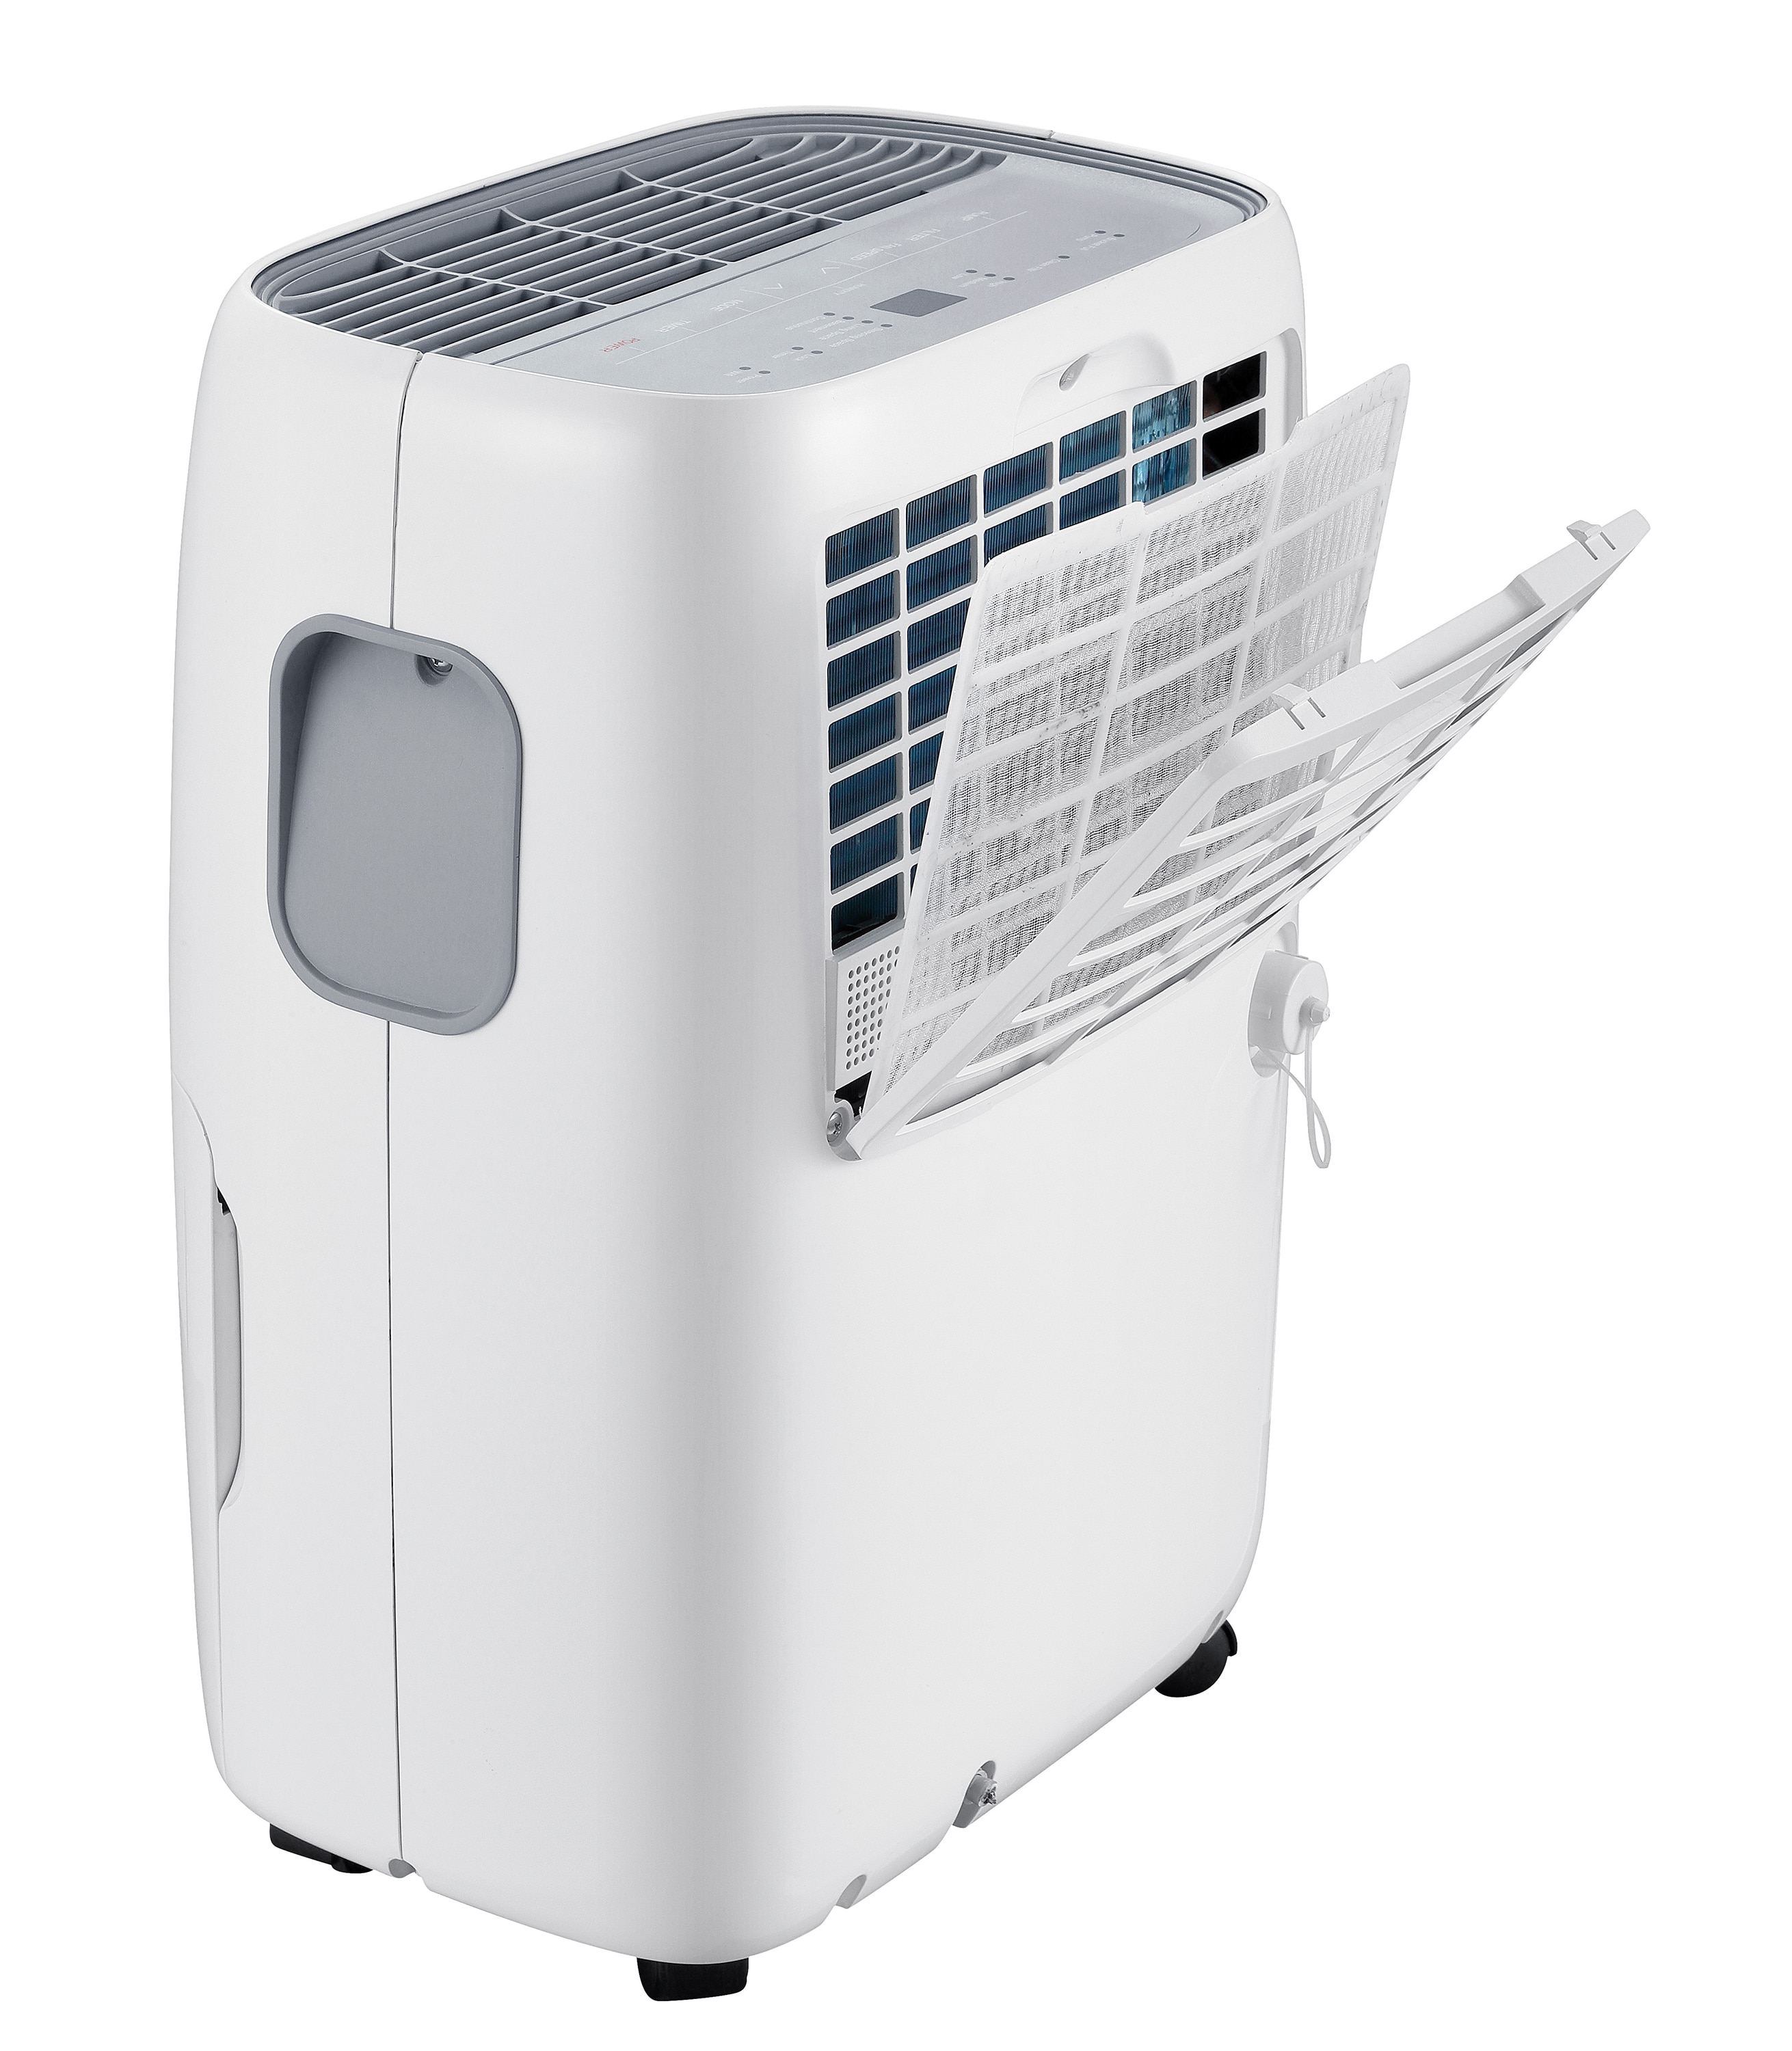 Dehumidifiers dsx-30m-01 220V 240 Volts Not for USA